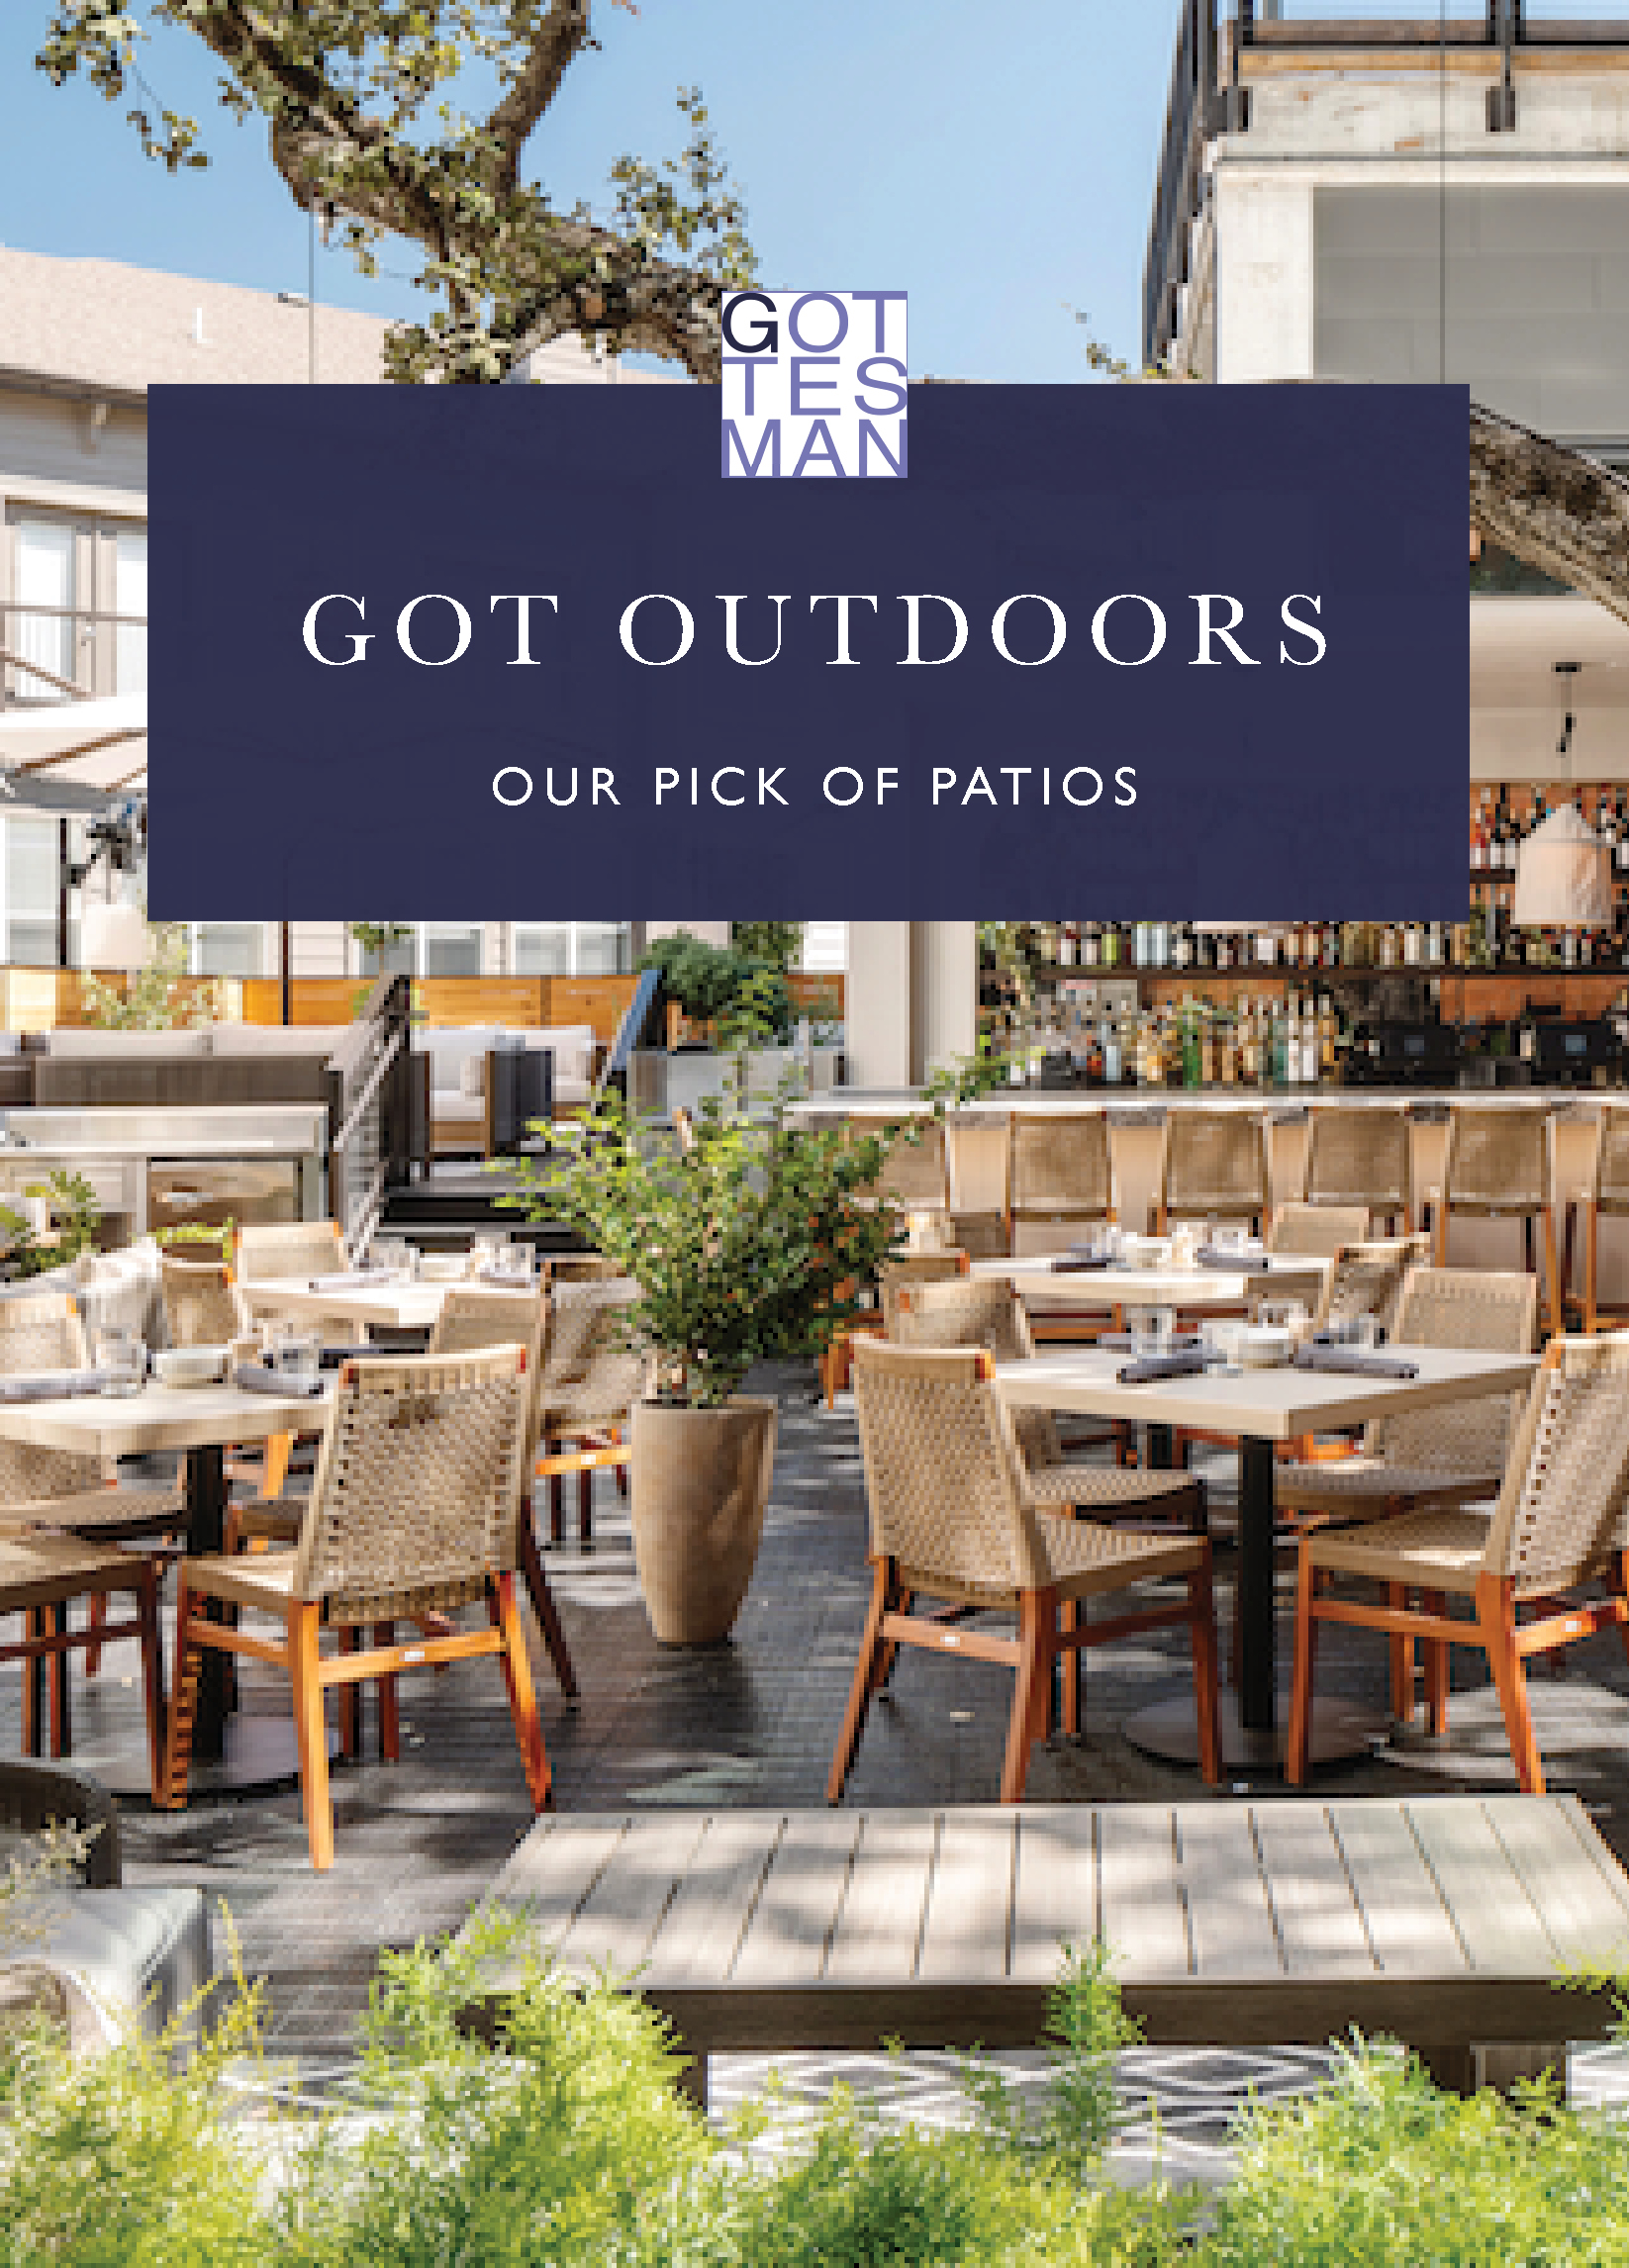 Patio dining with text overlay, "Got Austin: Our Pick of Patios"